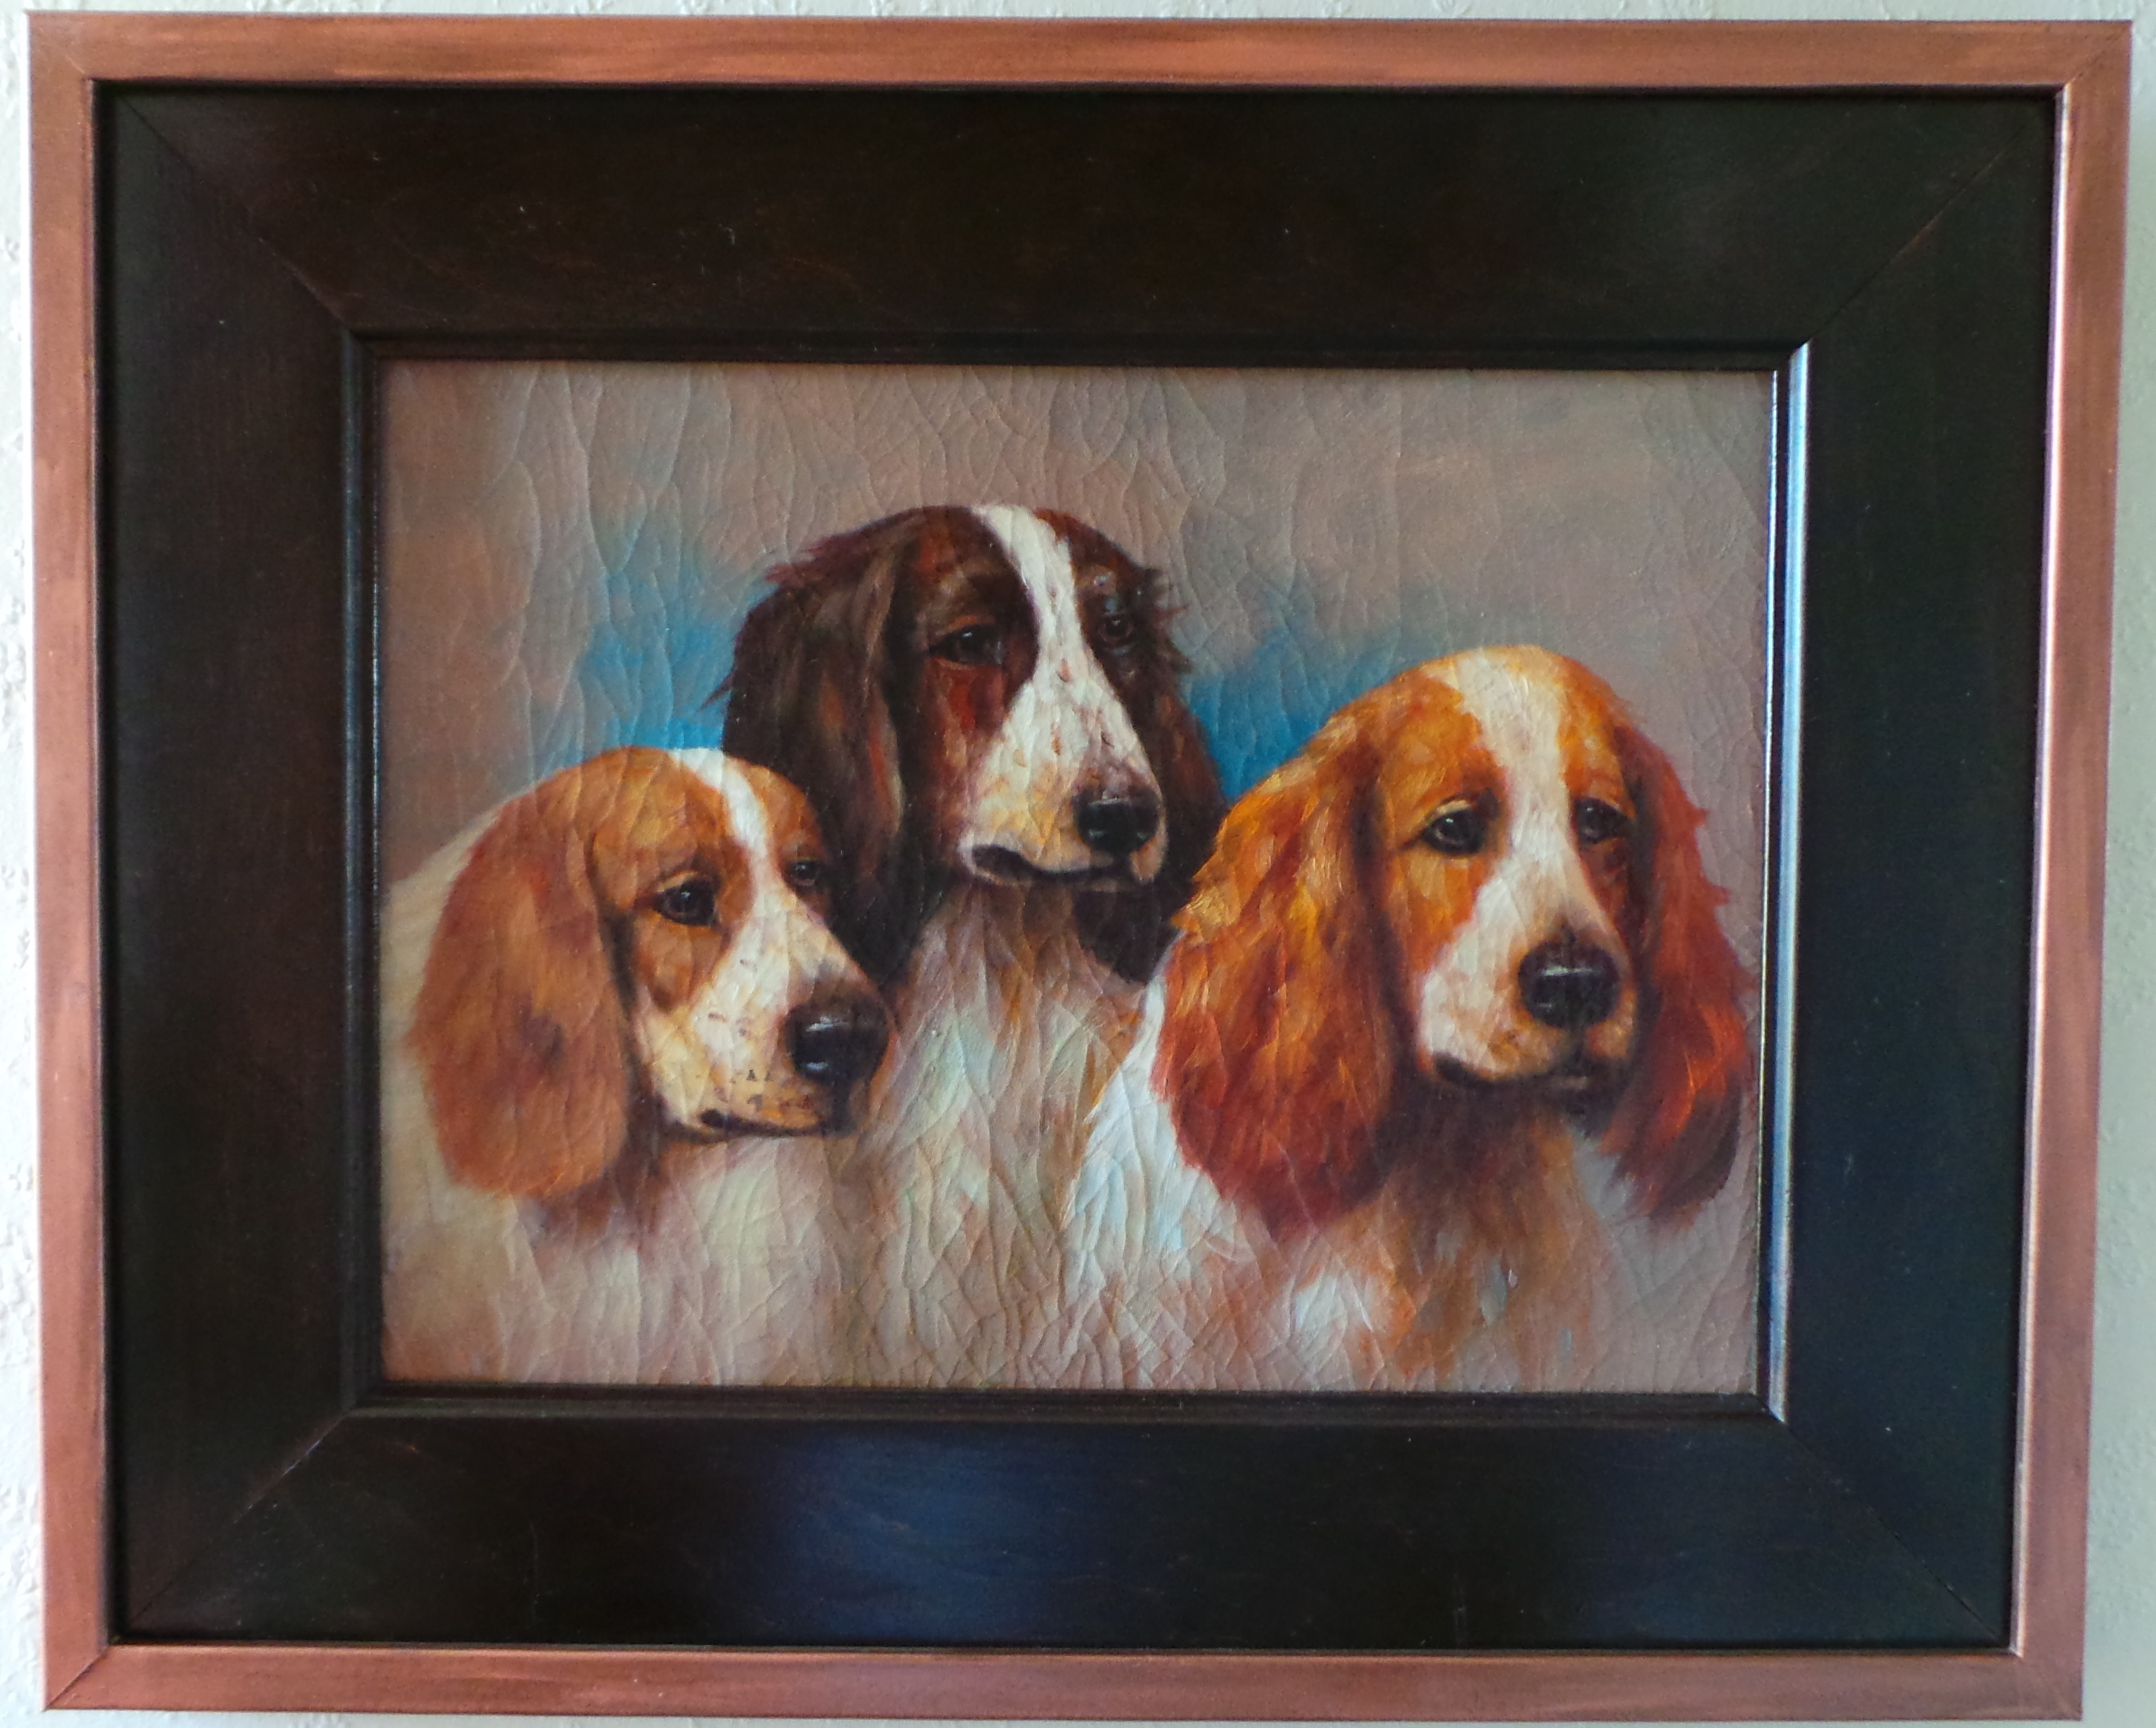 VINTAGE OIL PAINTING ON CANVAS PORTRAIT OF THREE DOGS.